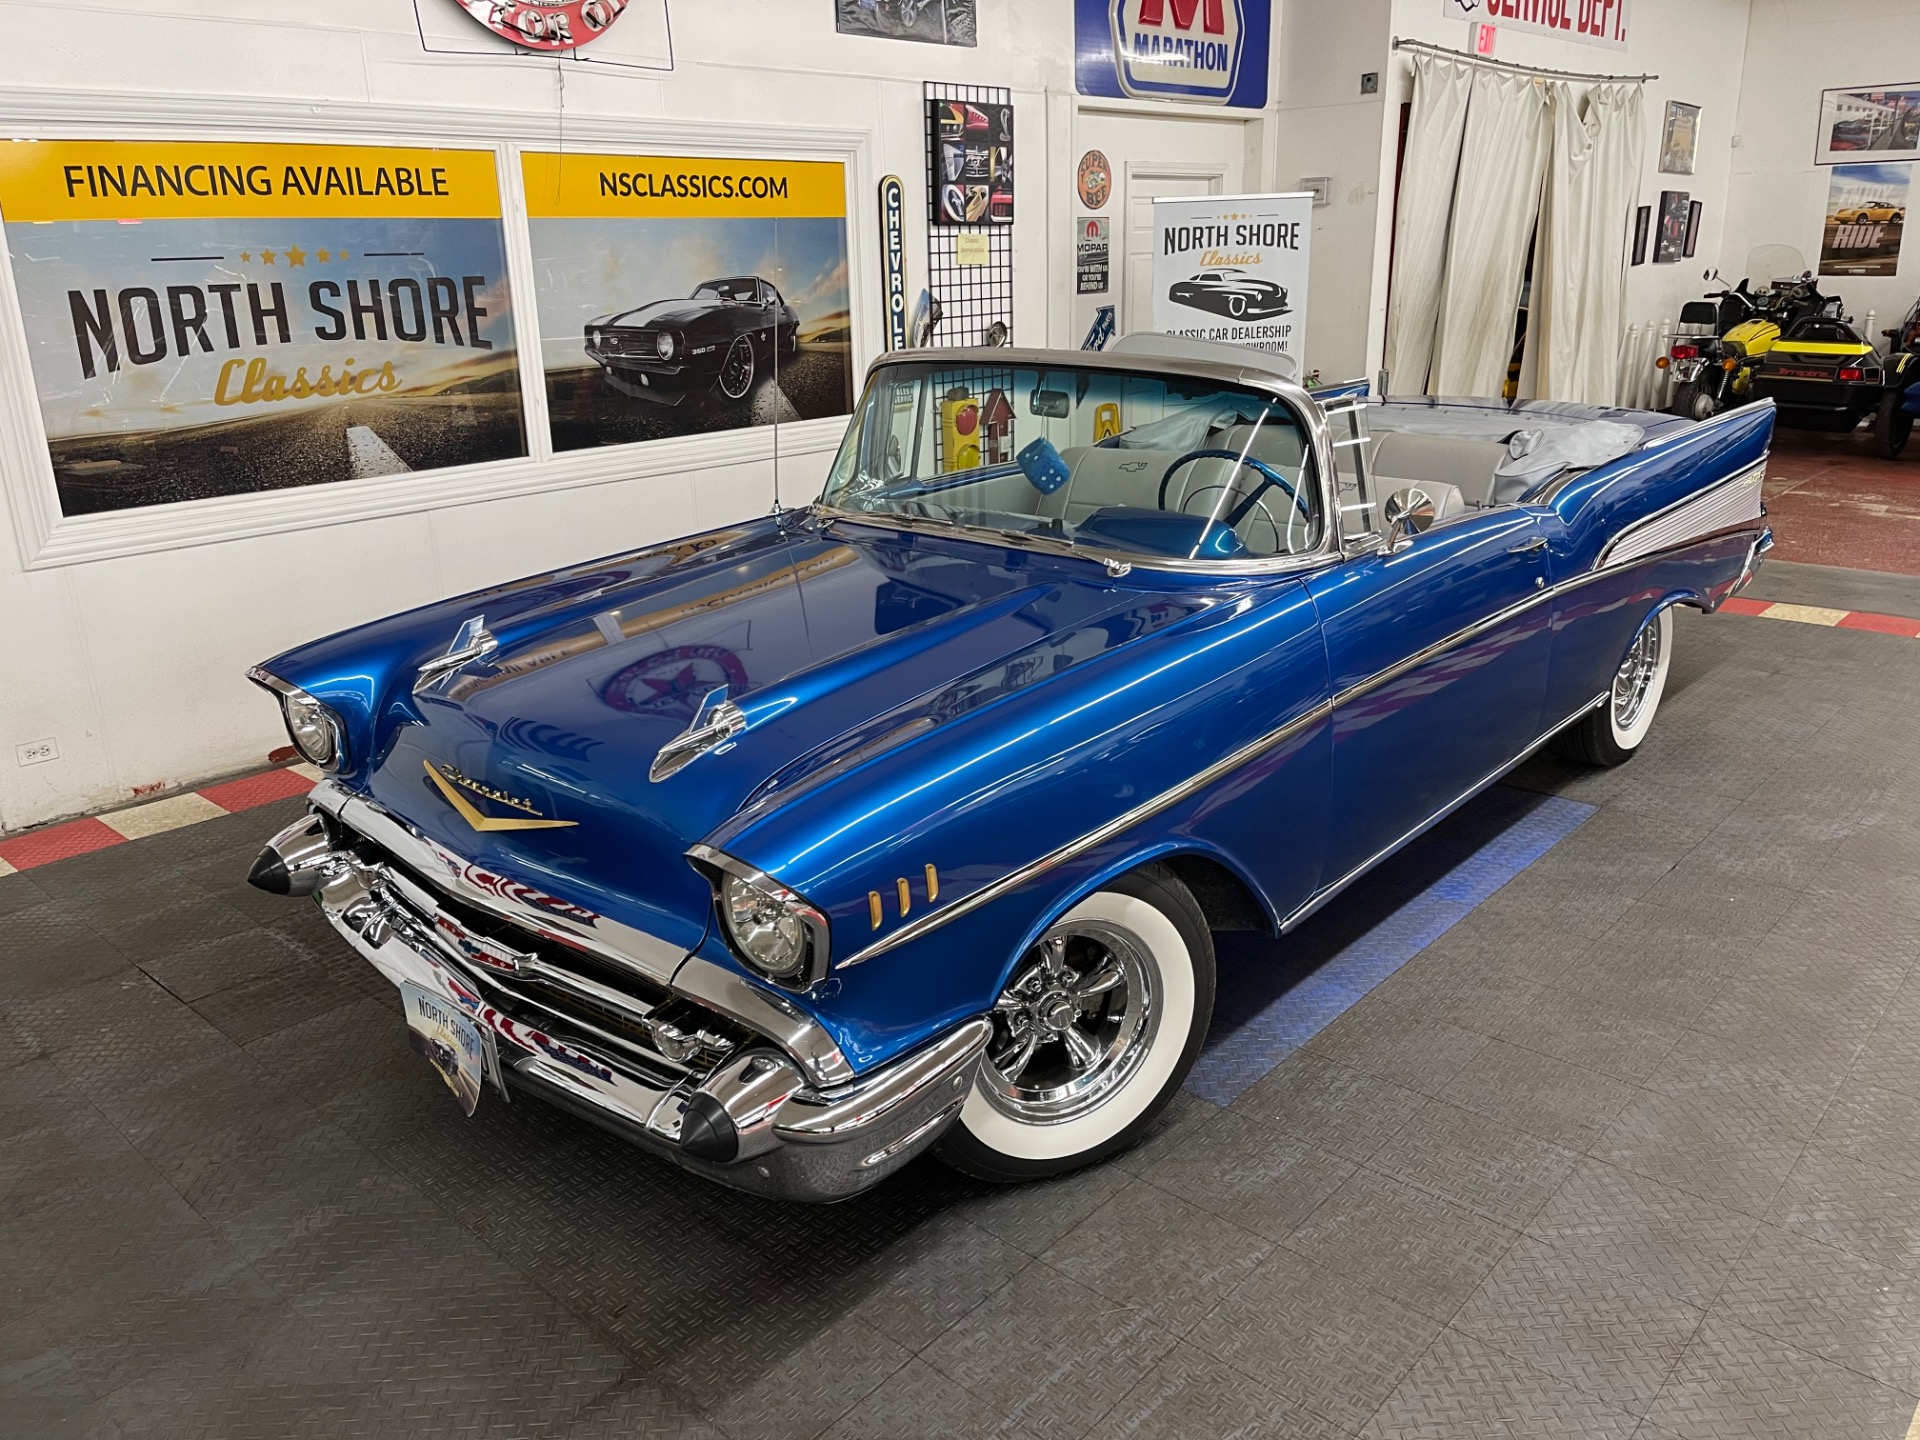 1957 Chevrolet Bel Air Convertible Listed At $230K, 52% OFF